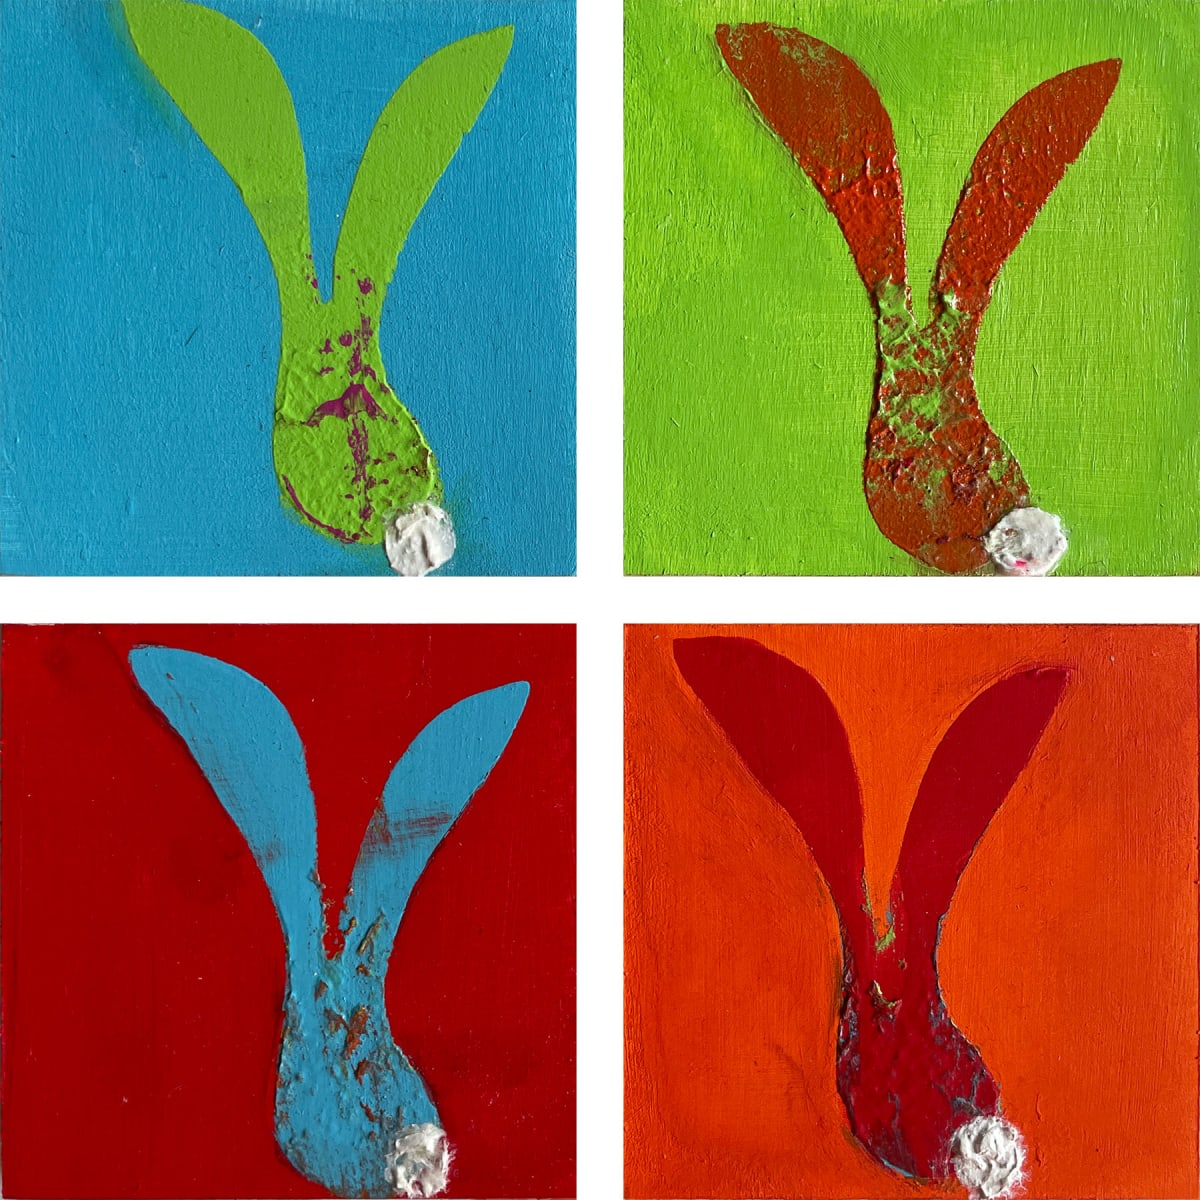 Bunny Vibes by Tina Psoinos  Image: Bunny Vibes set of 4